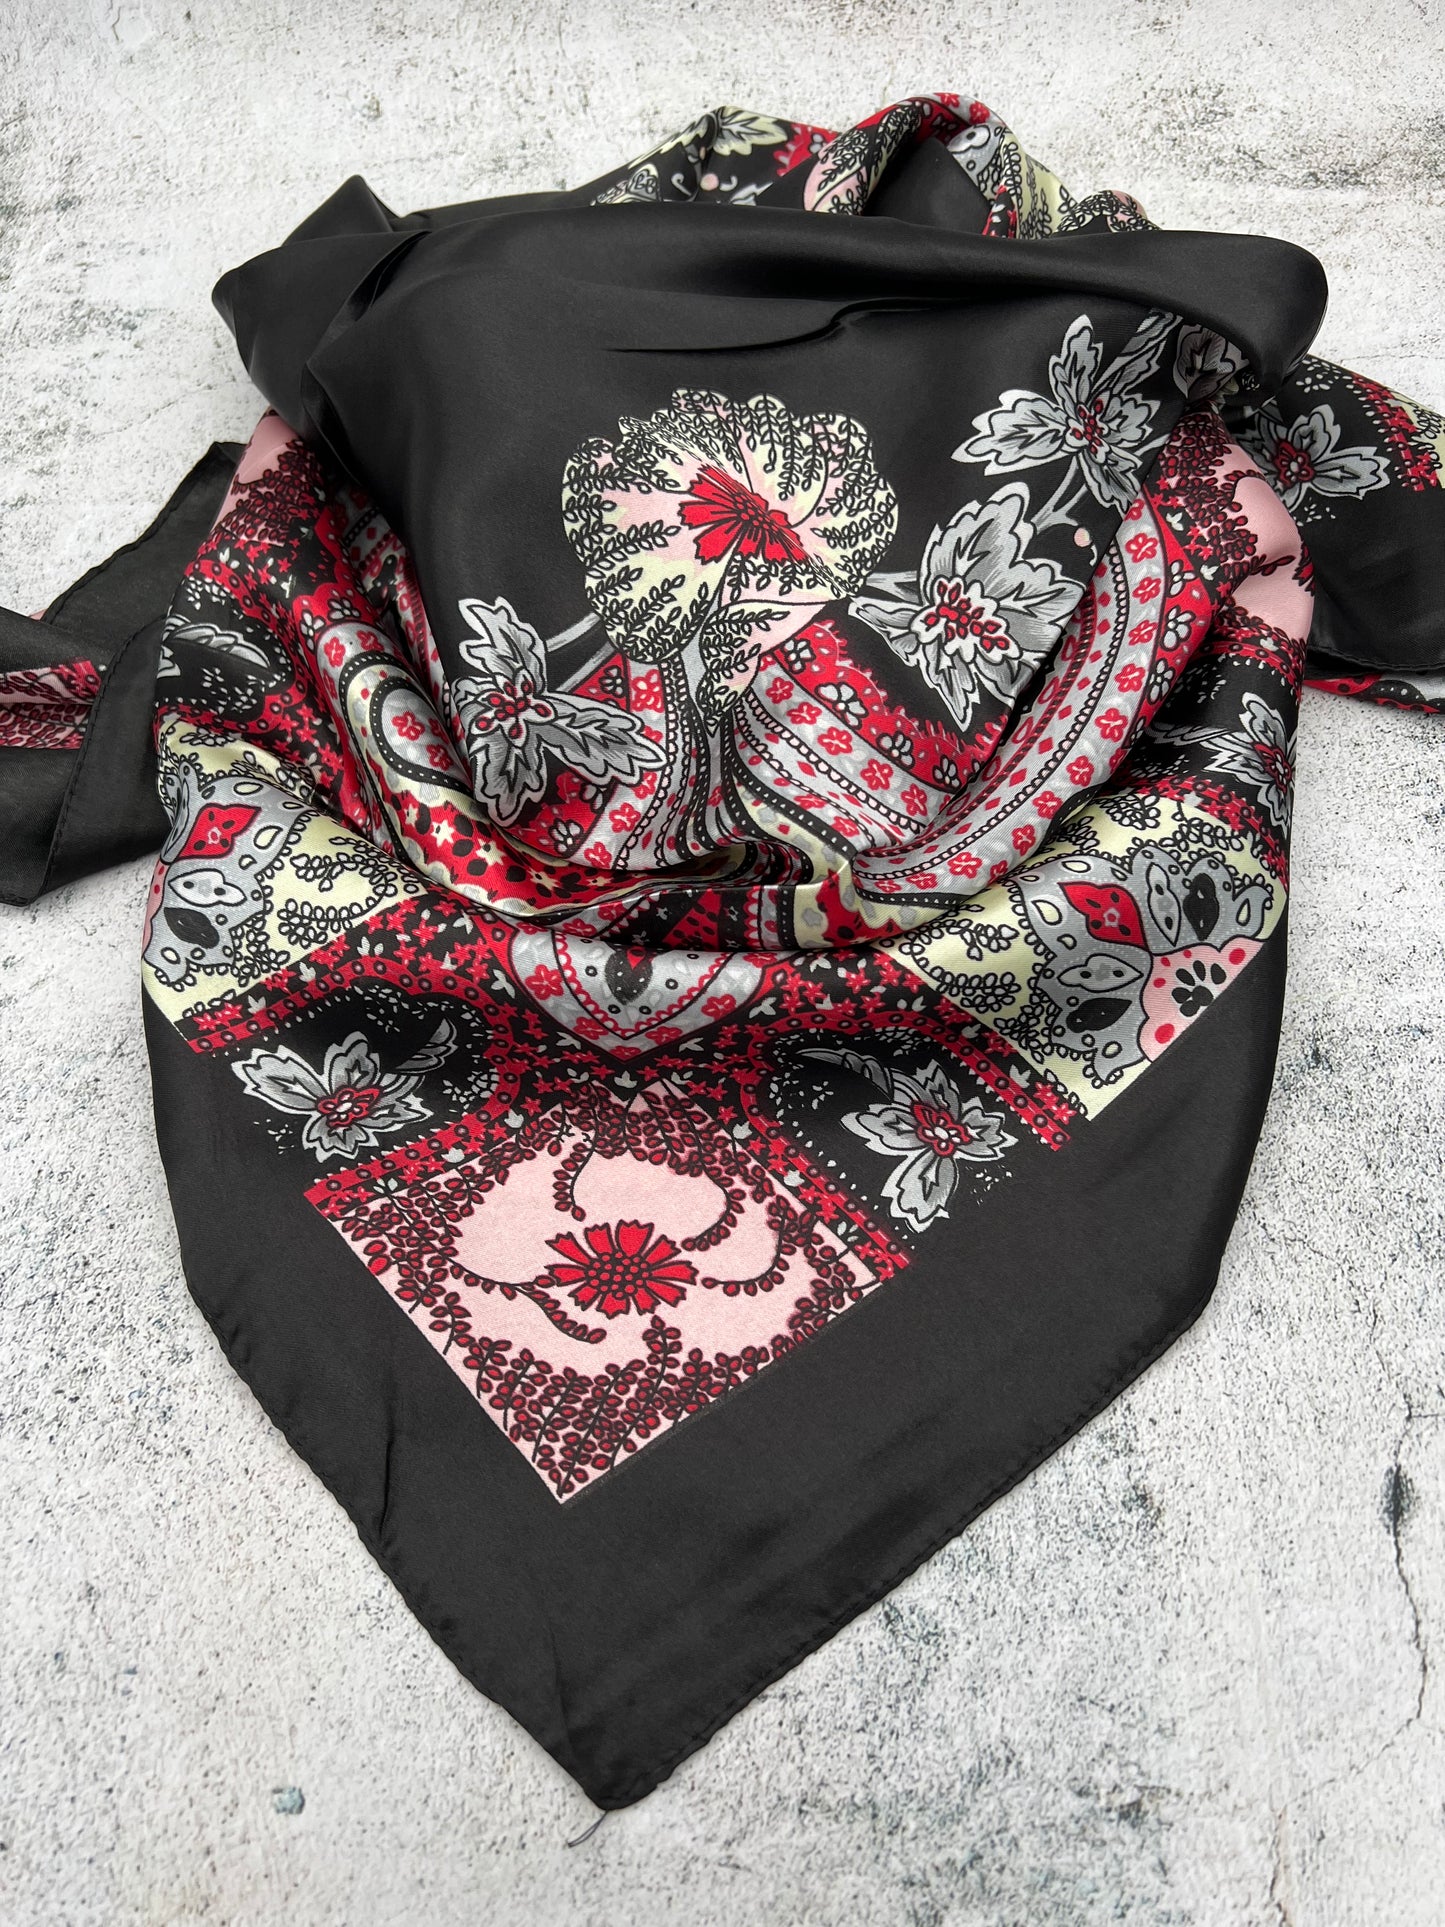 Black & Red Paisley Border - The Thrifty Cowgirl, Co.